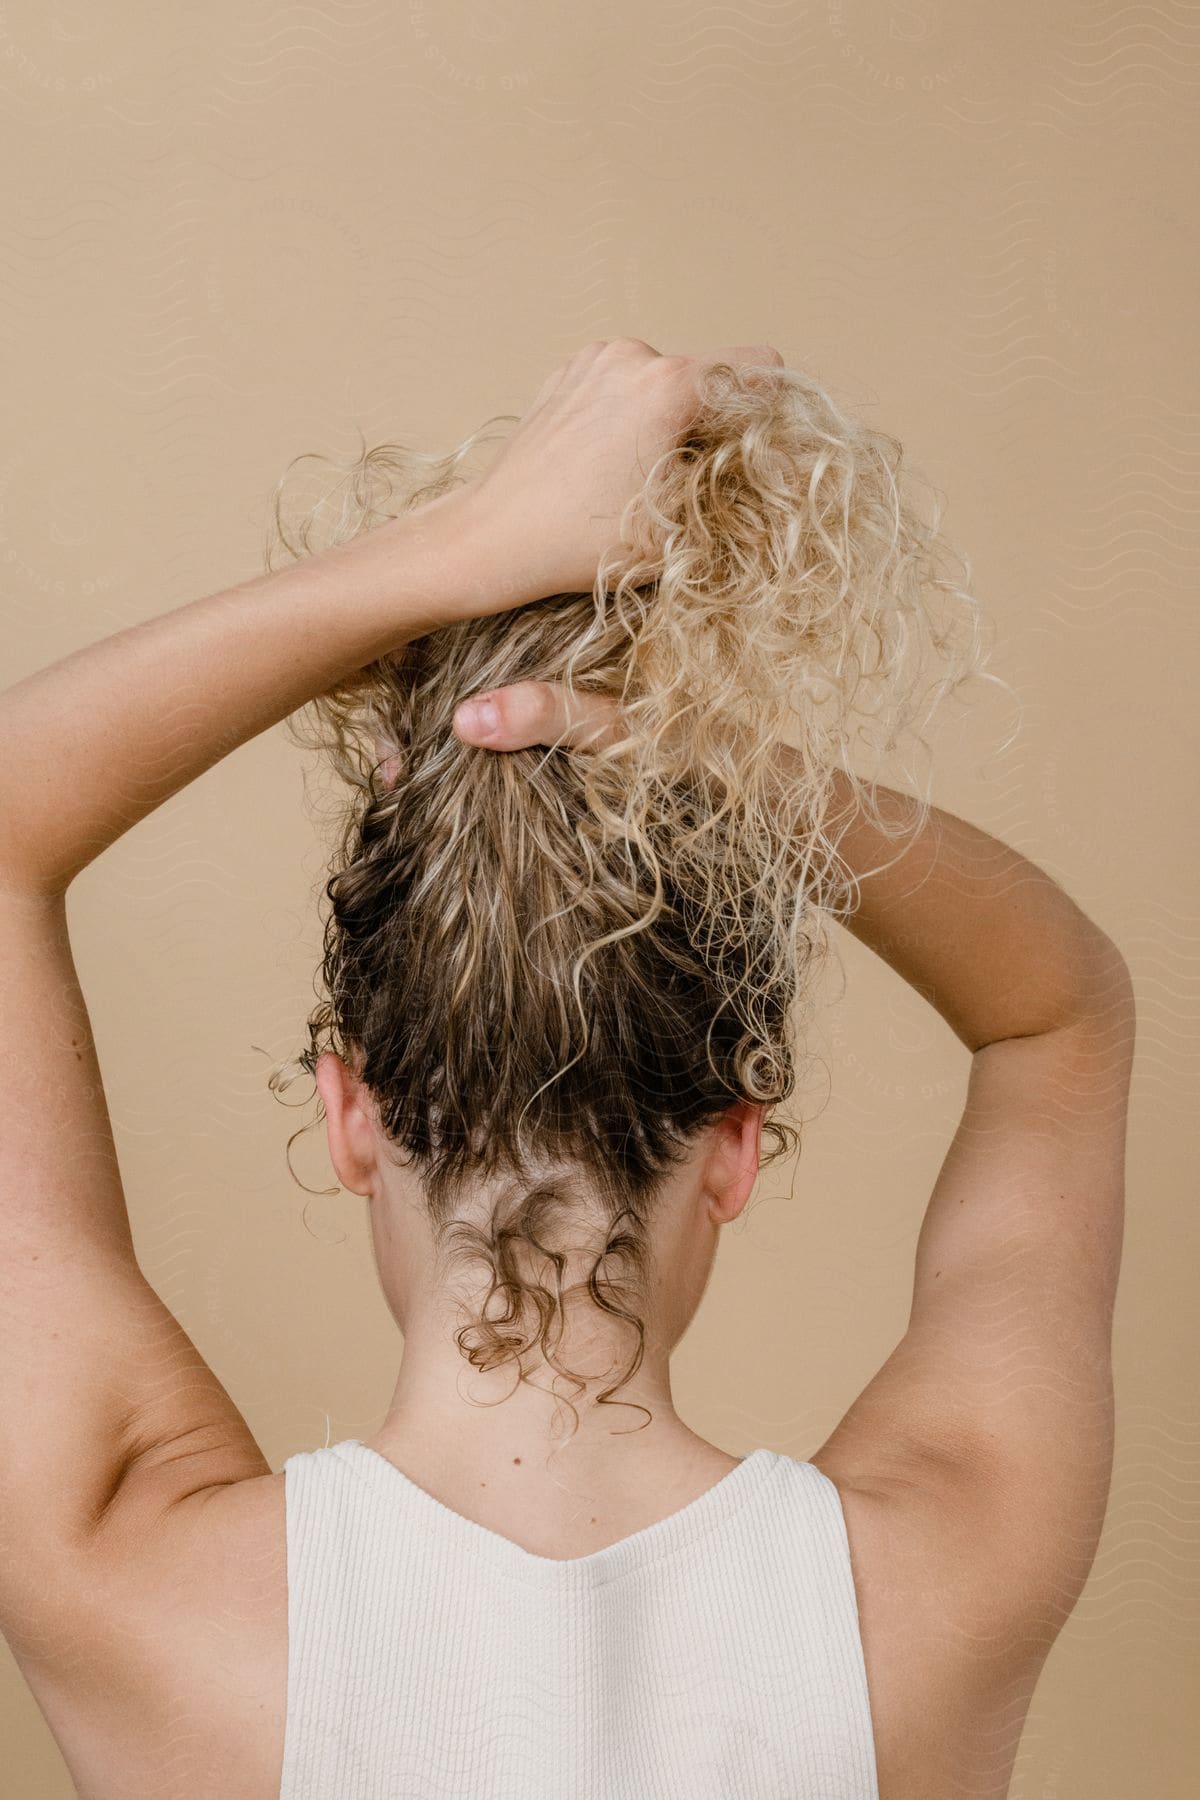 A blonde woman with curly hair, seen from behind, holding her hair.